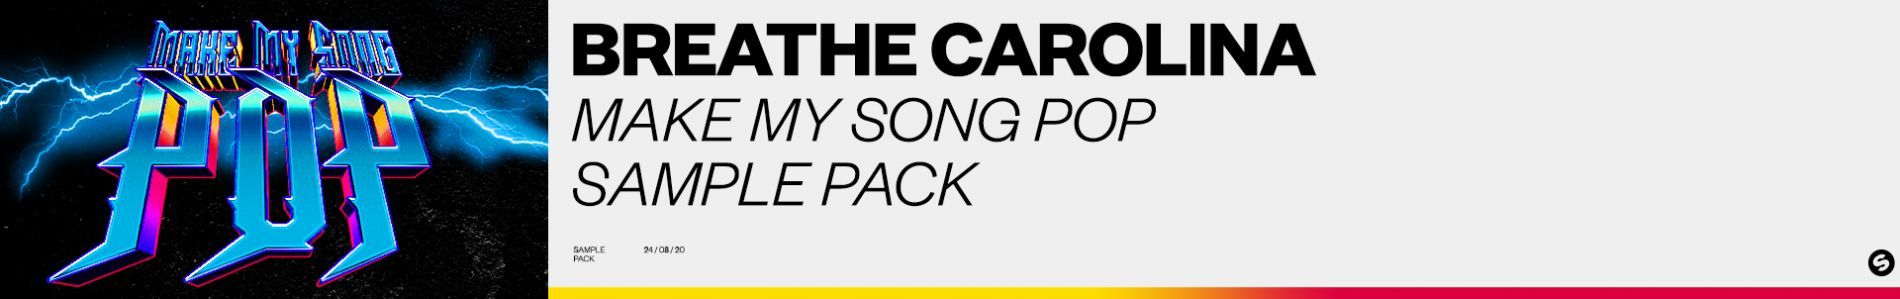 Produce your own track with Breathe Carolina's 'Make Your Song Pop' sample pack and win an amazing prize pack!